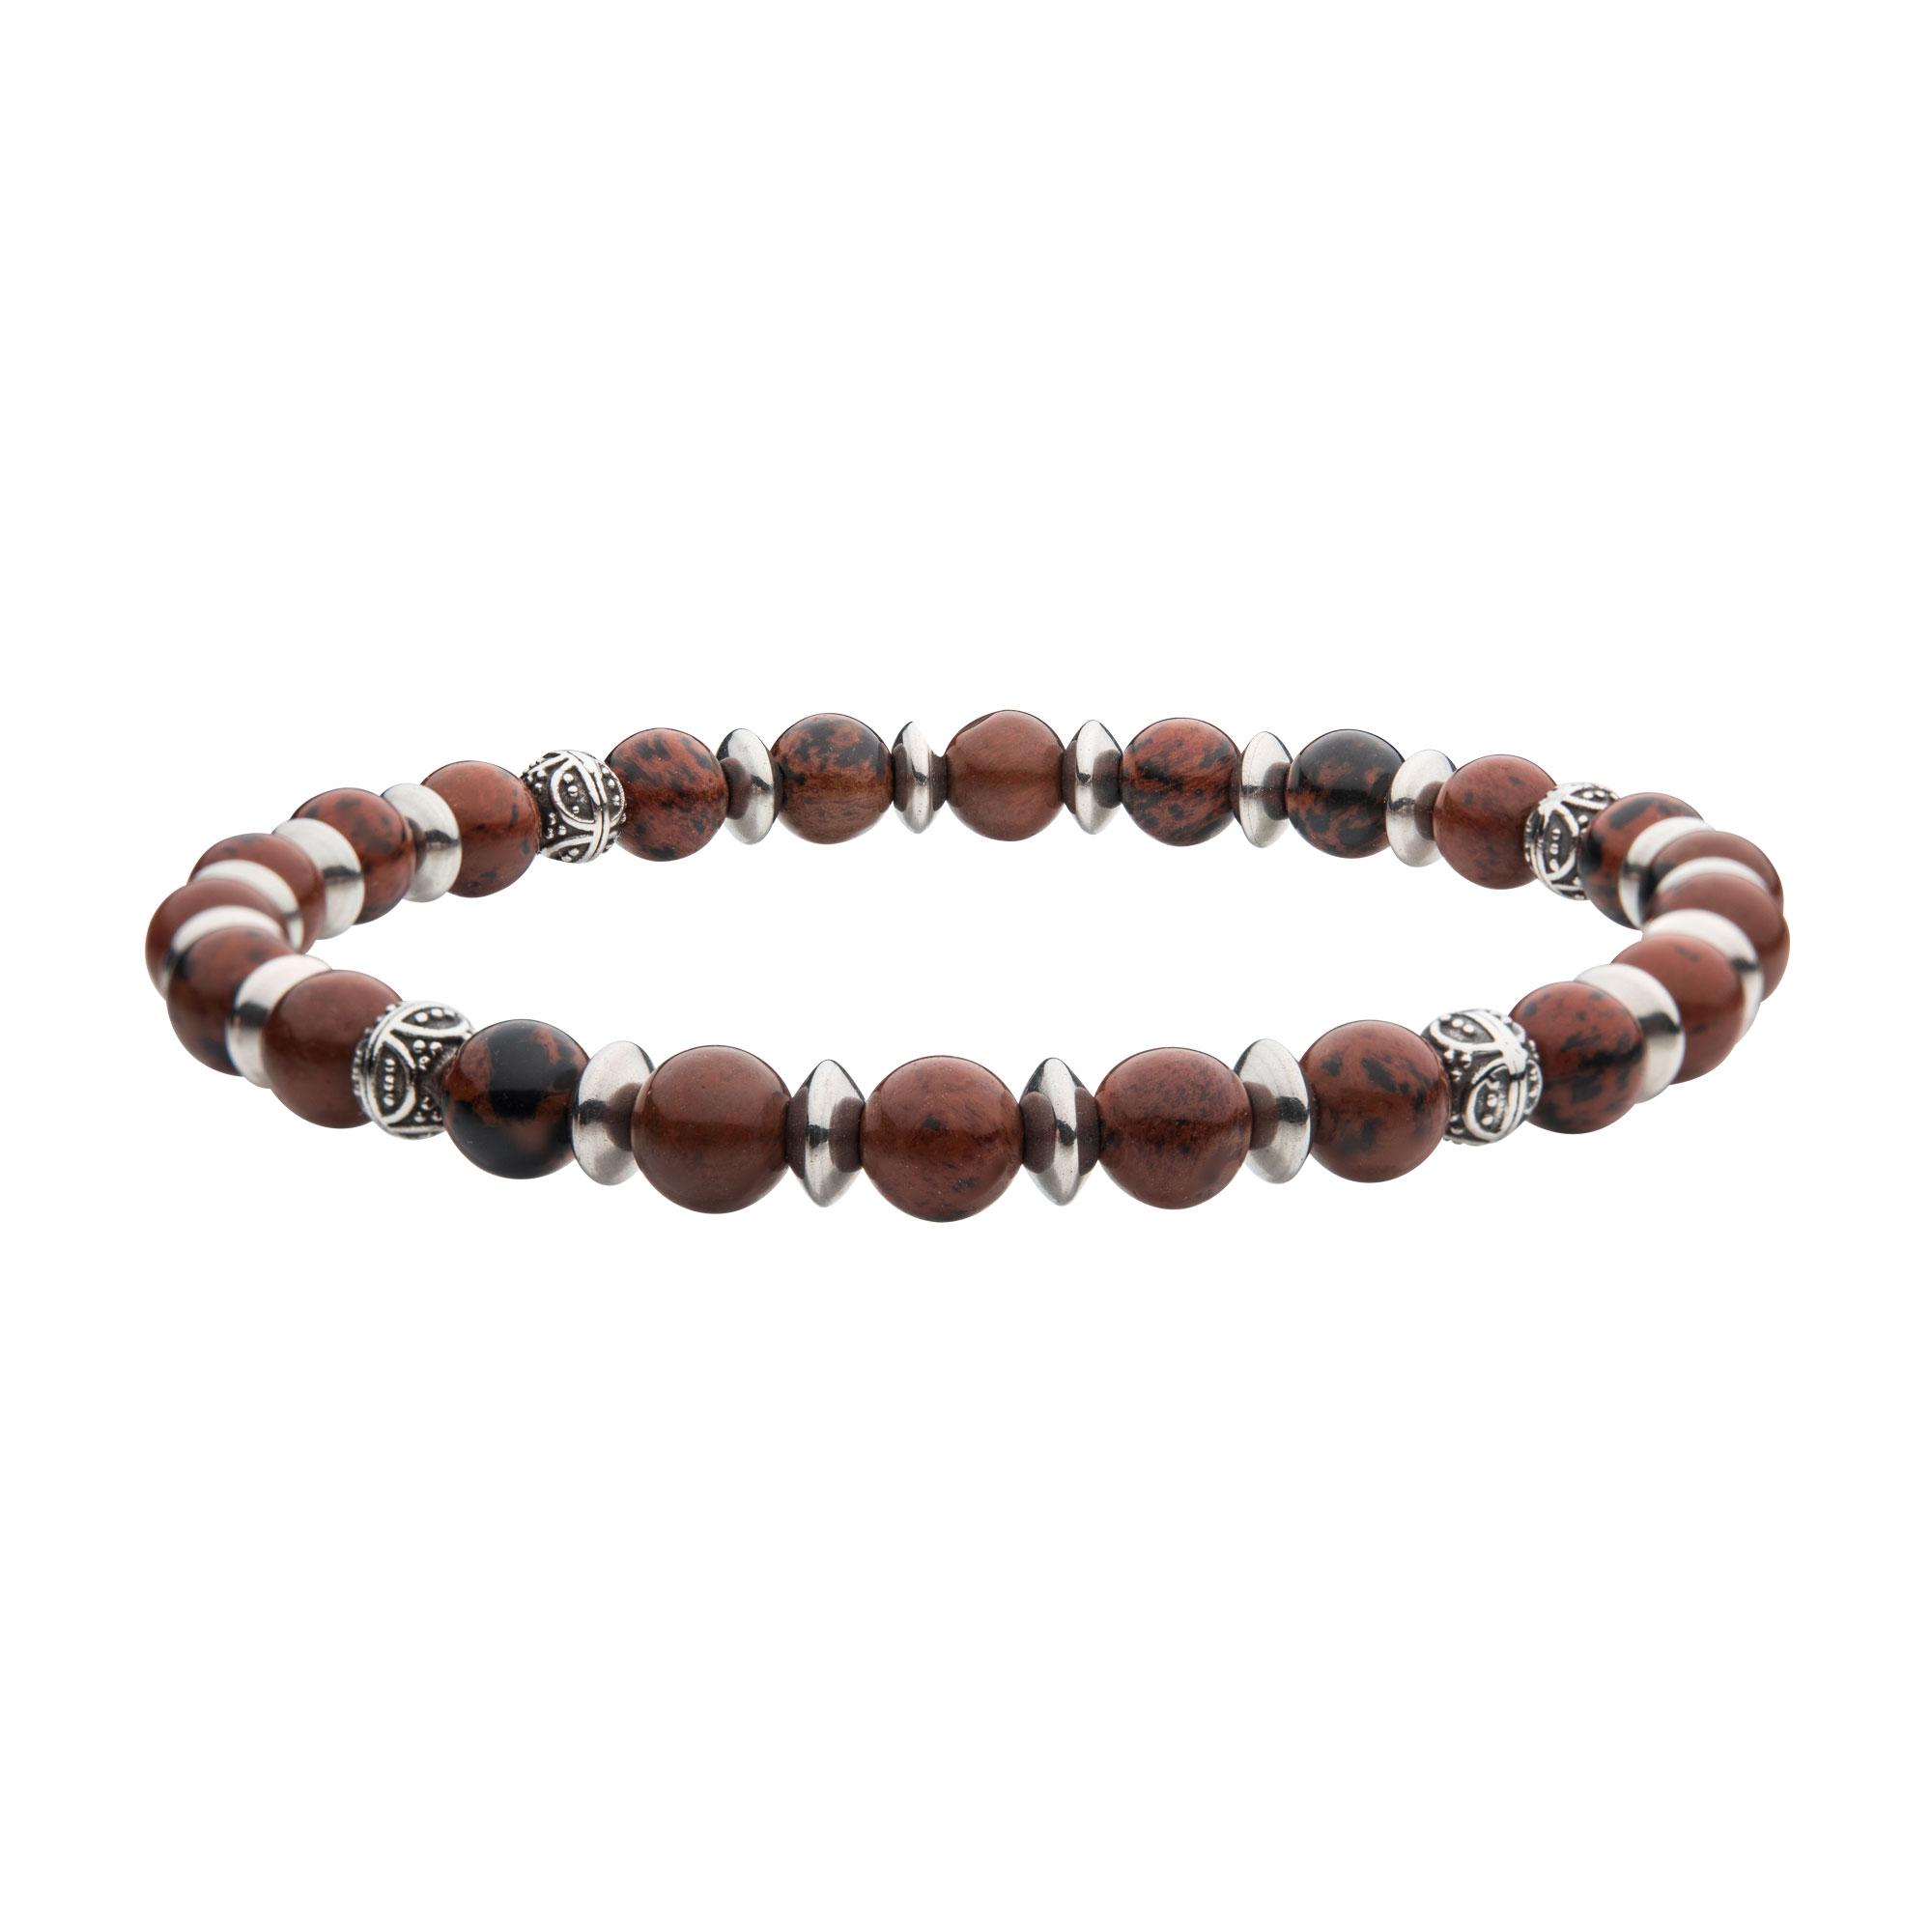 Brown Obsidian Stones with Black Oxidized Beads Bracelet Mueller Jewelers Chisago City, MN